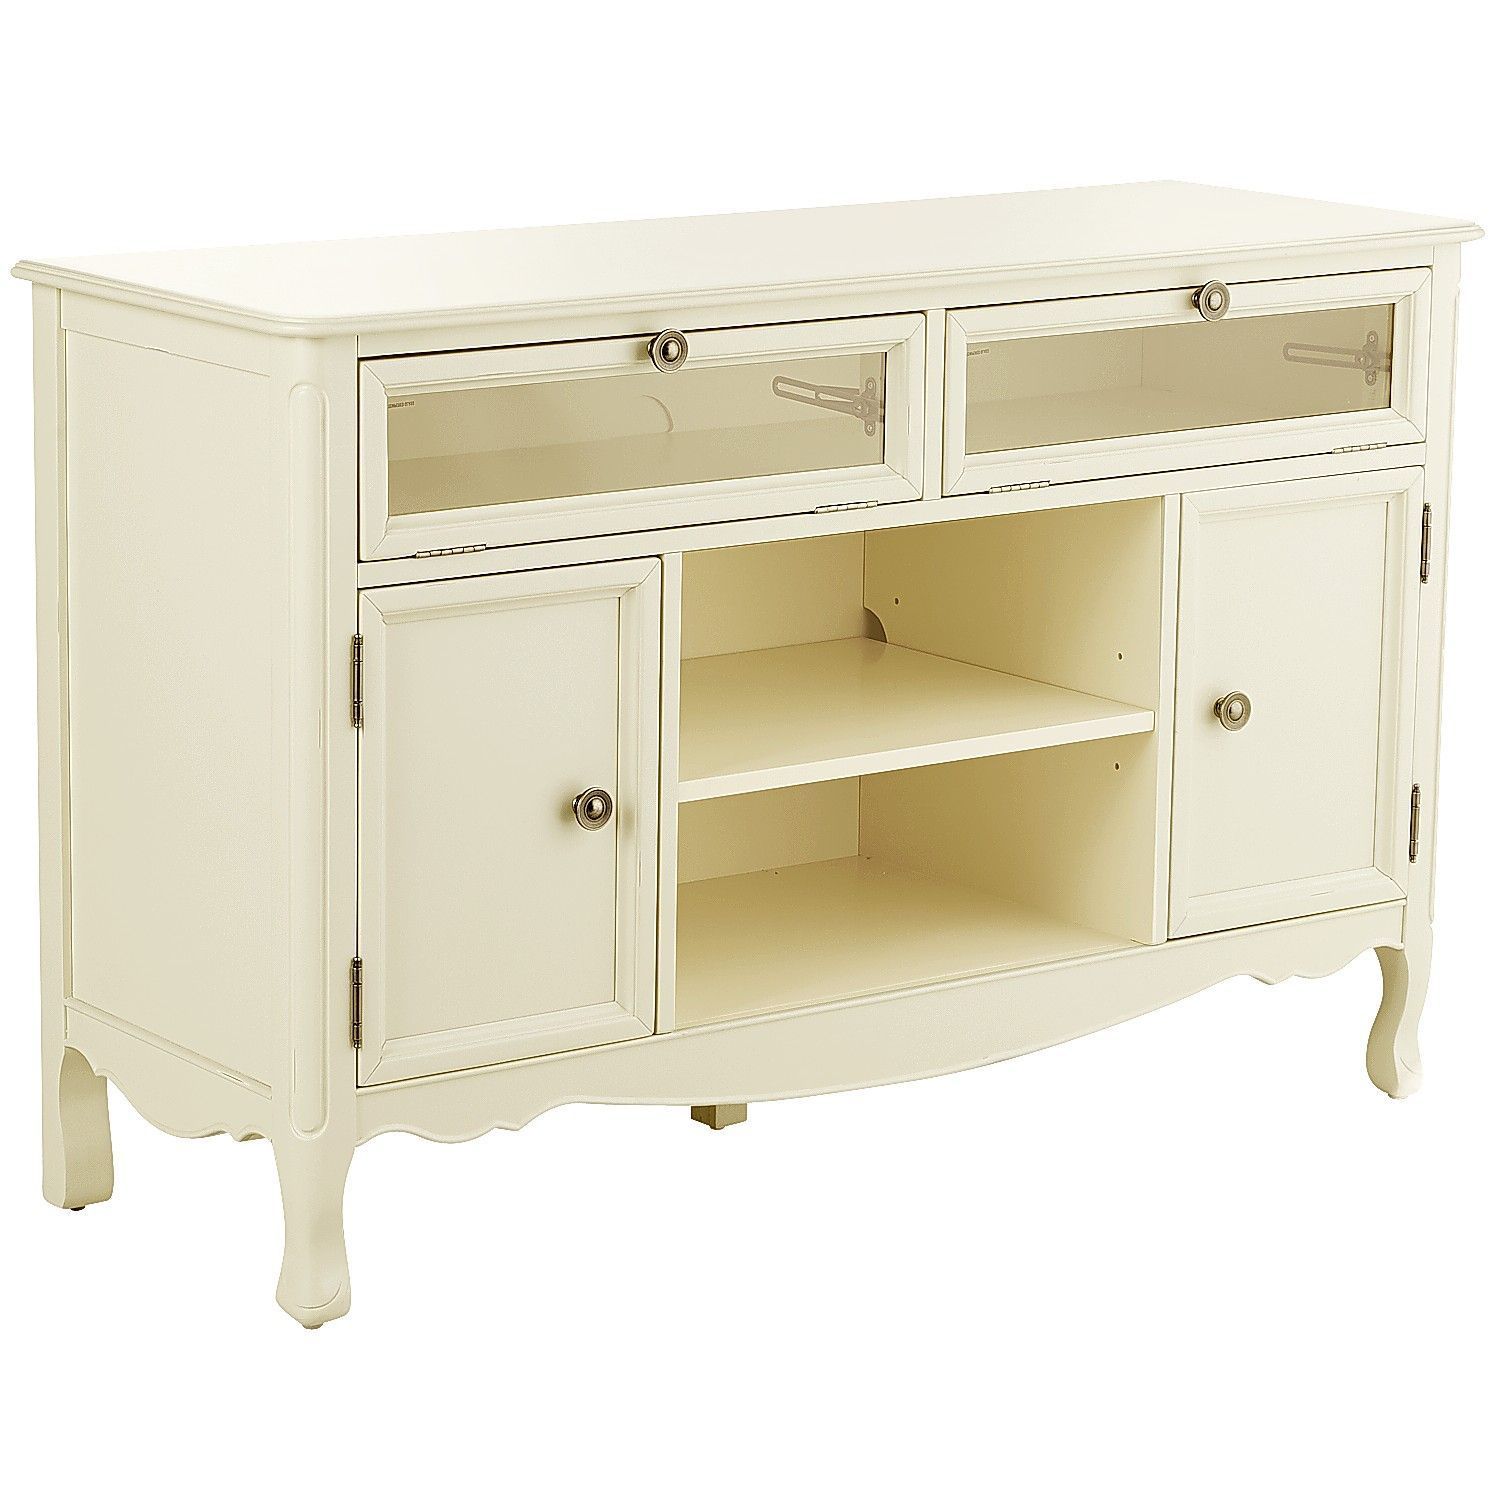 Madeline Antique White 52" Tv Stand | Products | Furniture Regarding Annabelle Blue 70 Inch Tv Stands (View 3 of 30)